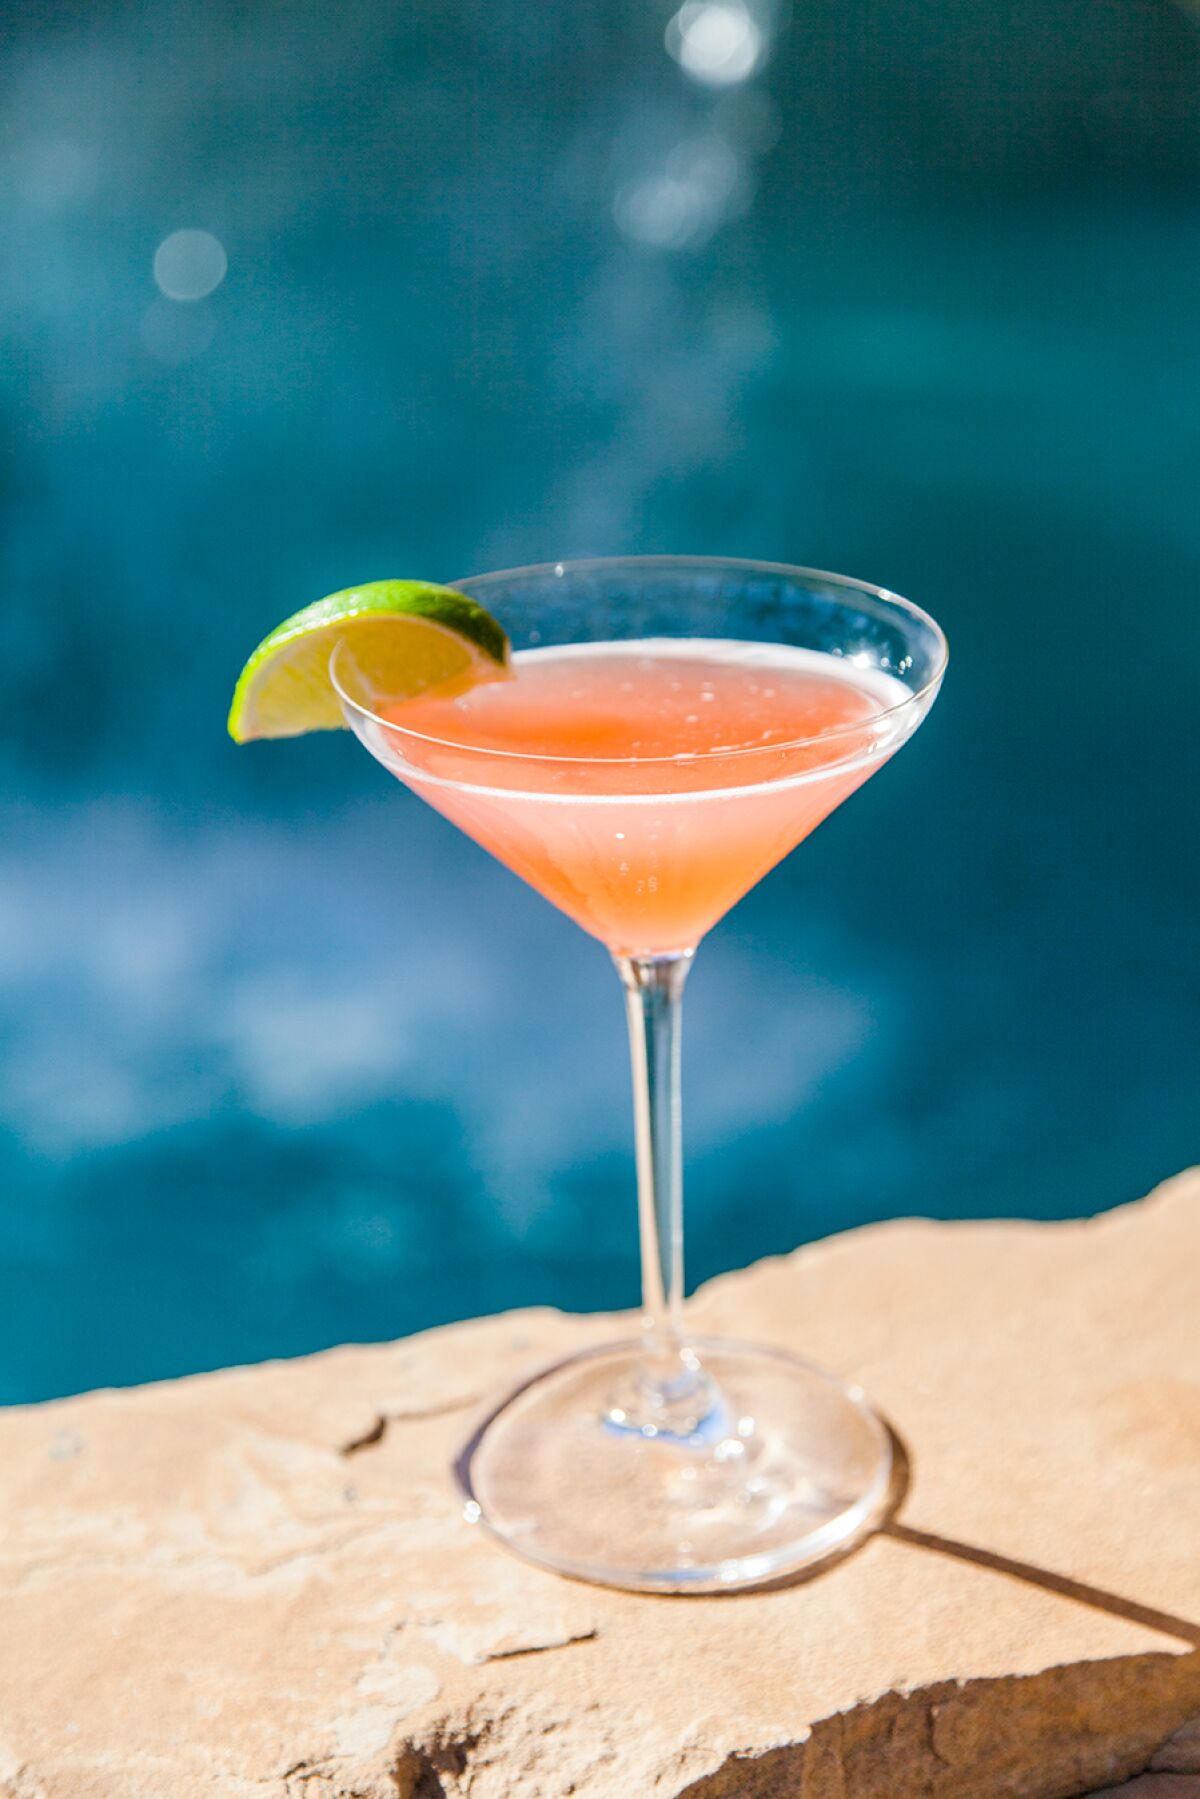 Popular Demand, a customer favorite at Harrah's, is made with strawberry rhubarb vodka, pavan, lime, and basil lemon syrup.